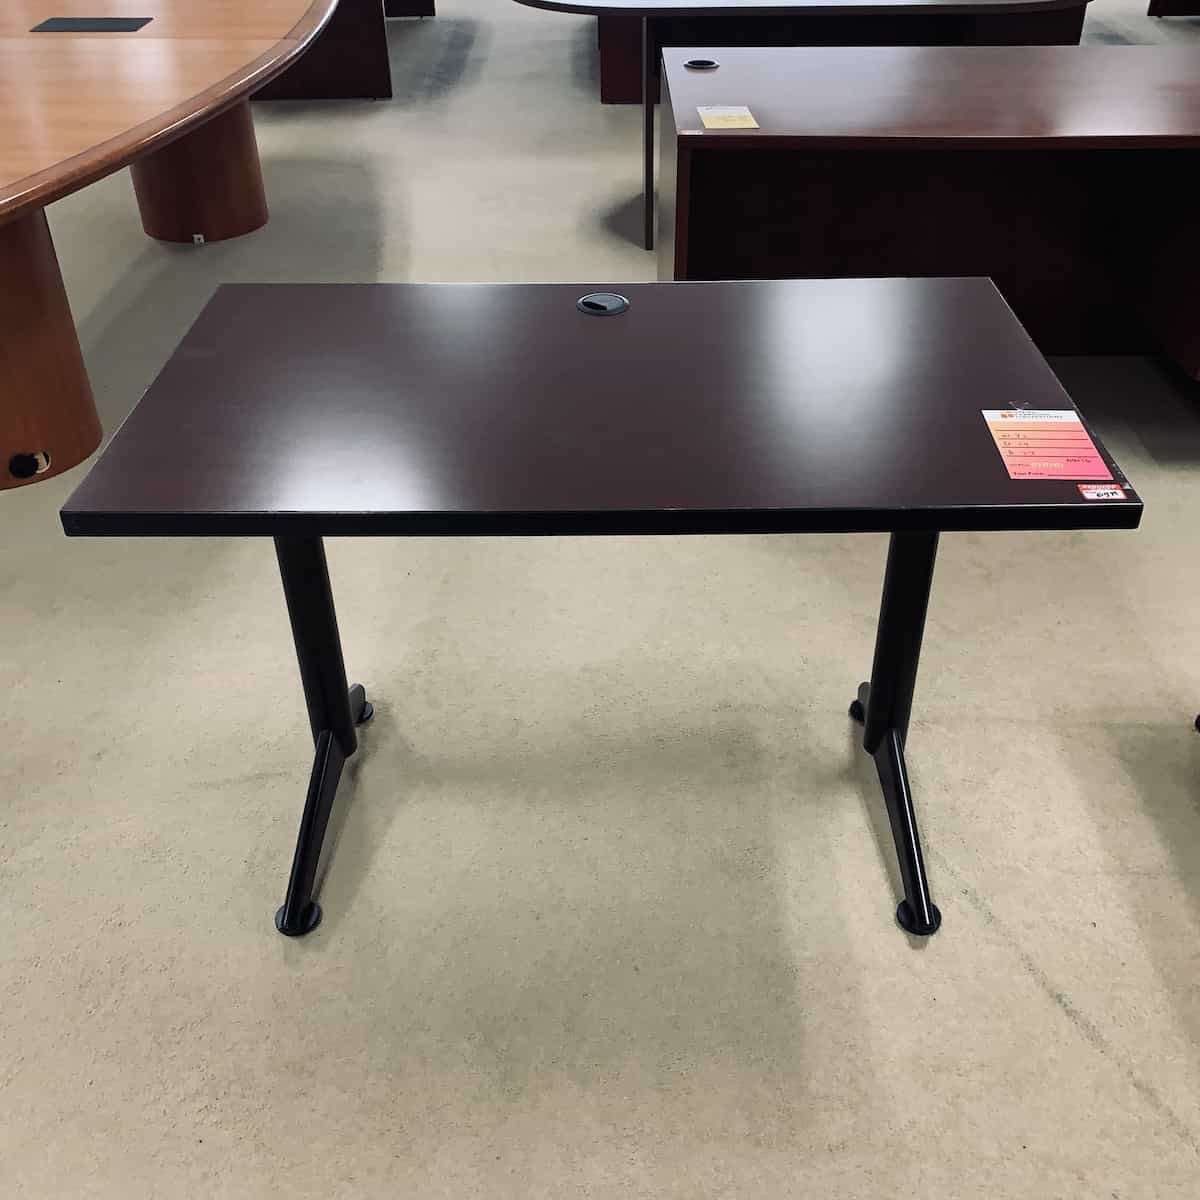 mahogany-black-student-desk-with-mesh-cord-management-front